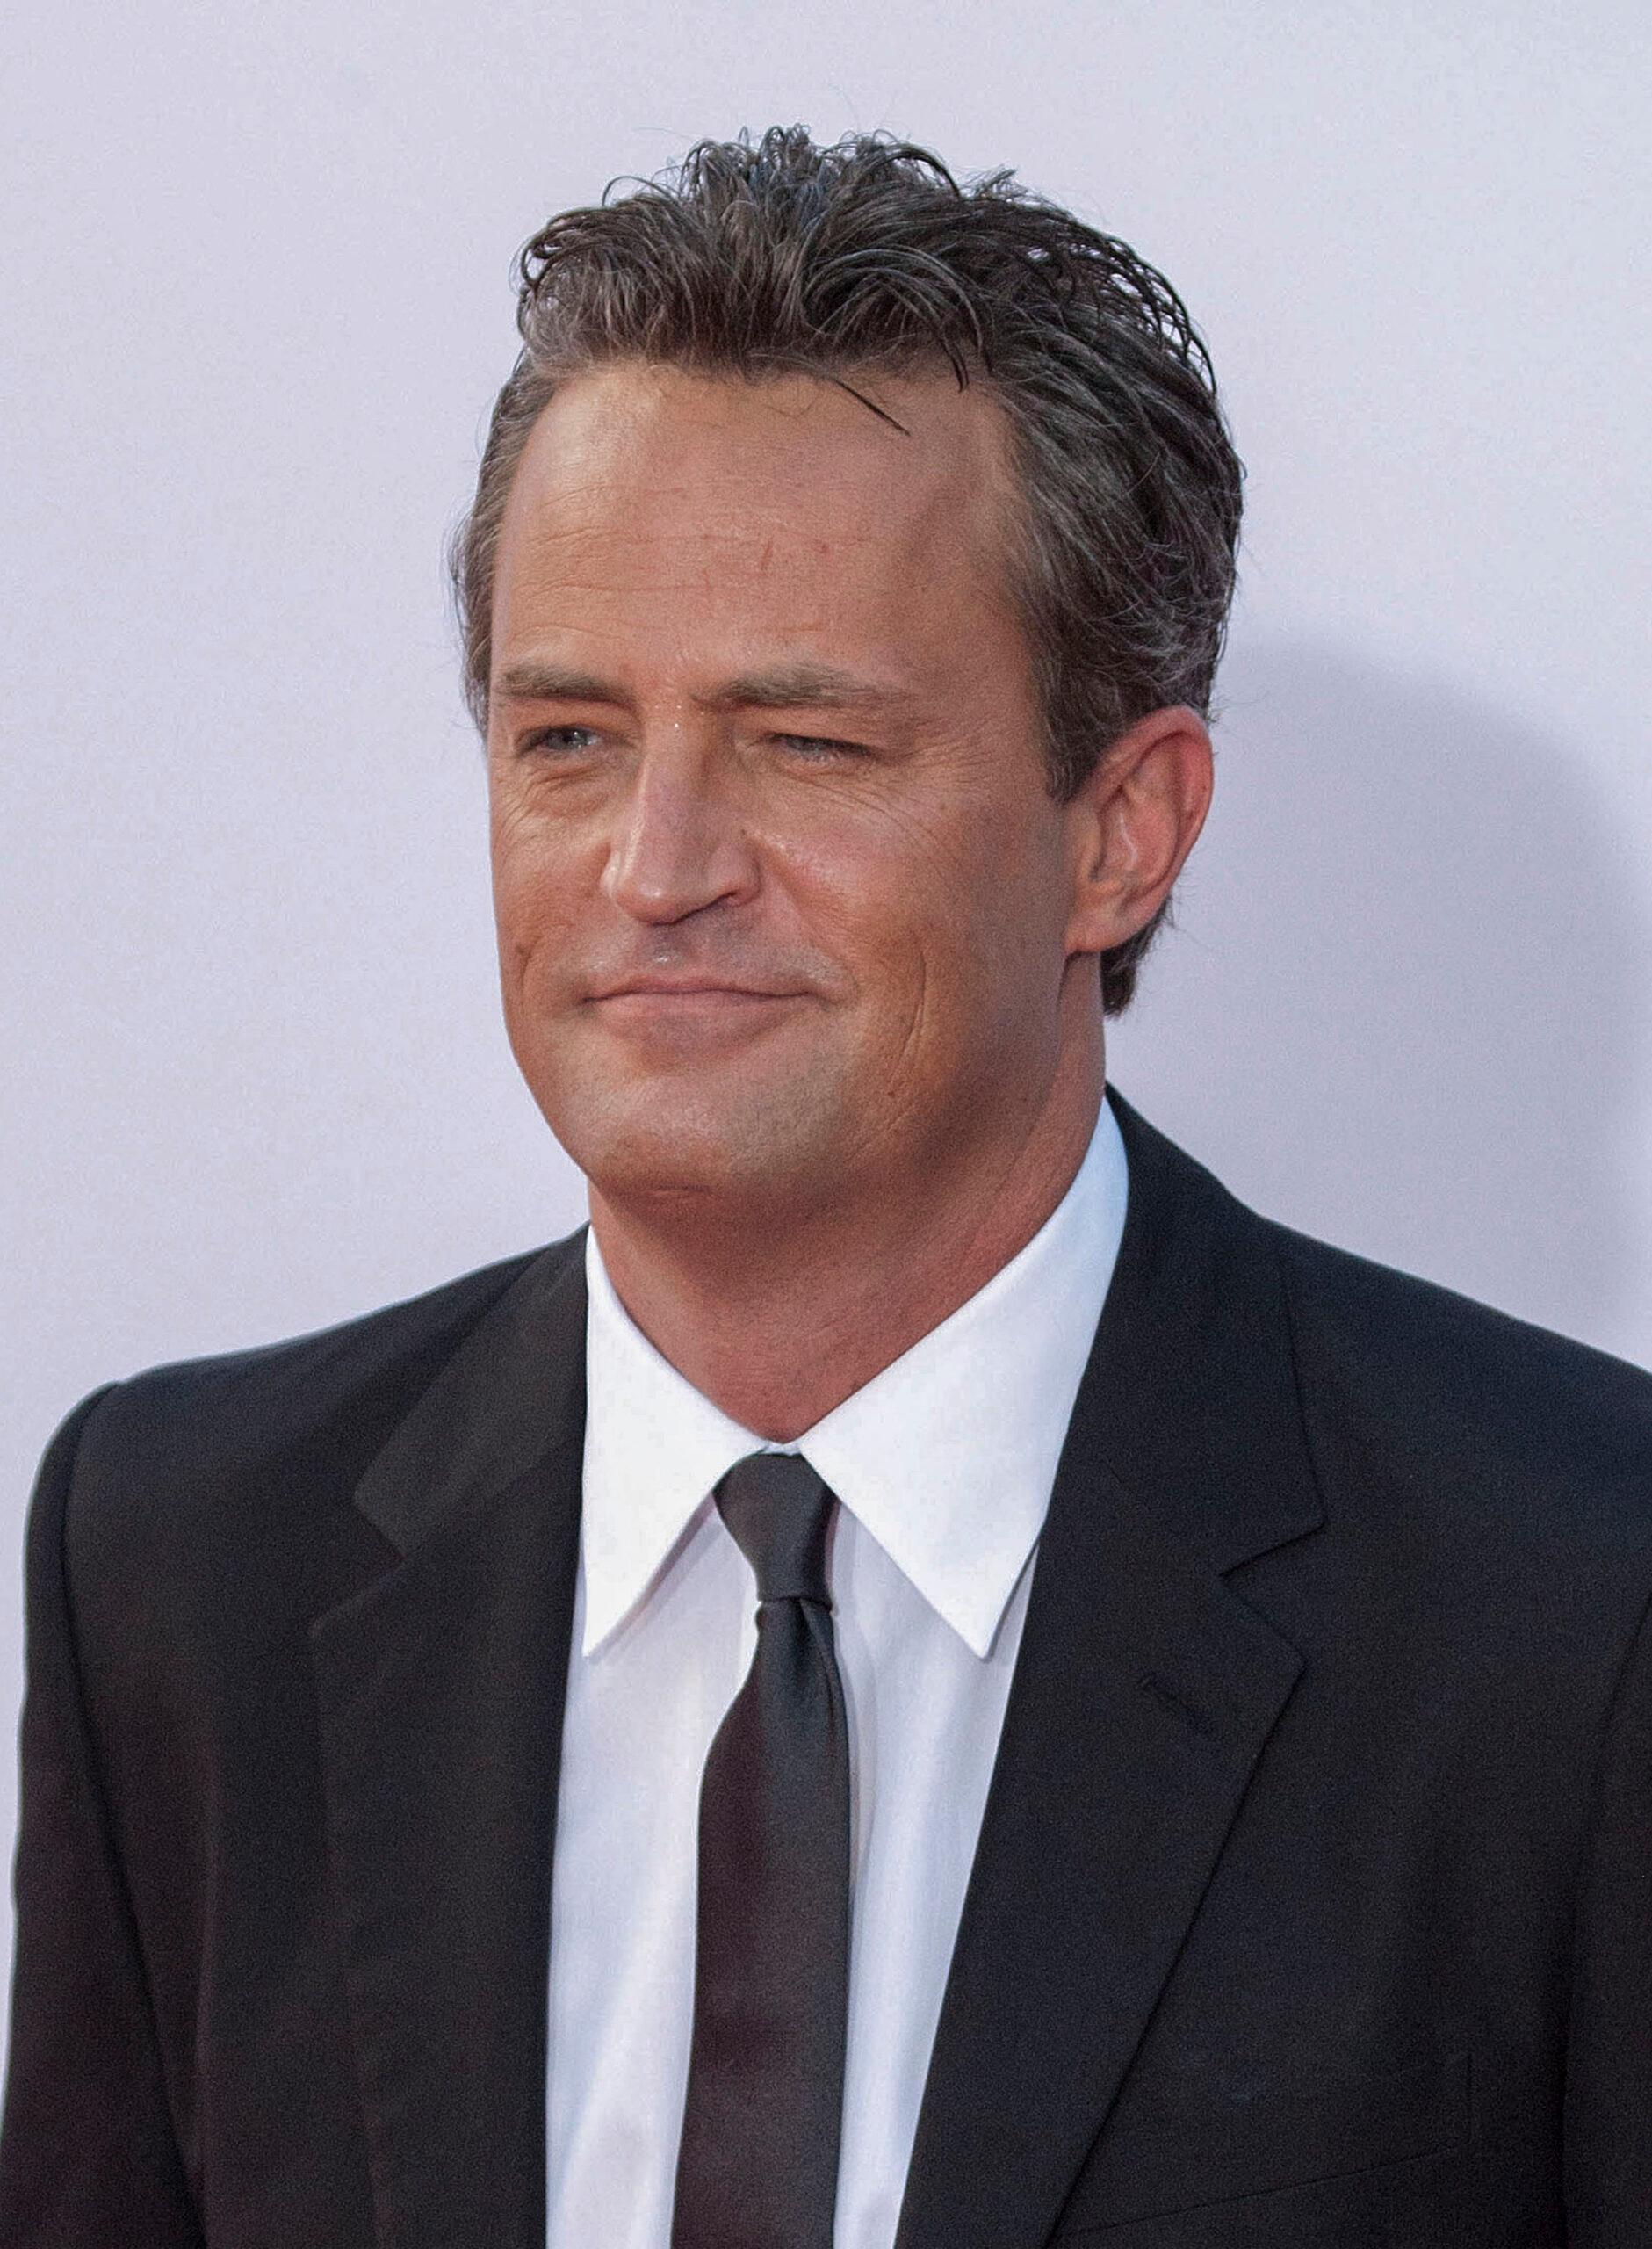 Antidepressants and anxiety medications found in Matthew Perry's home